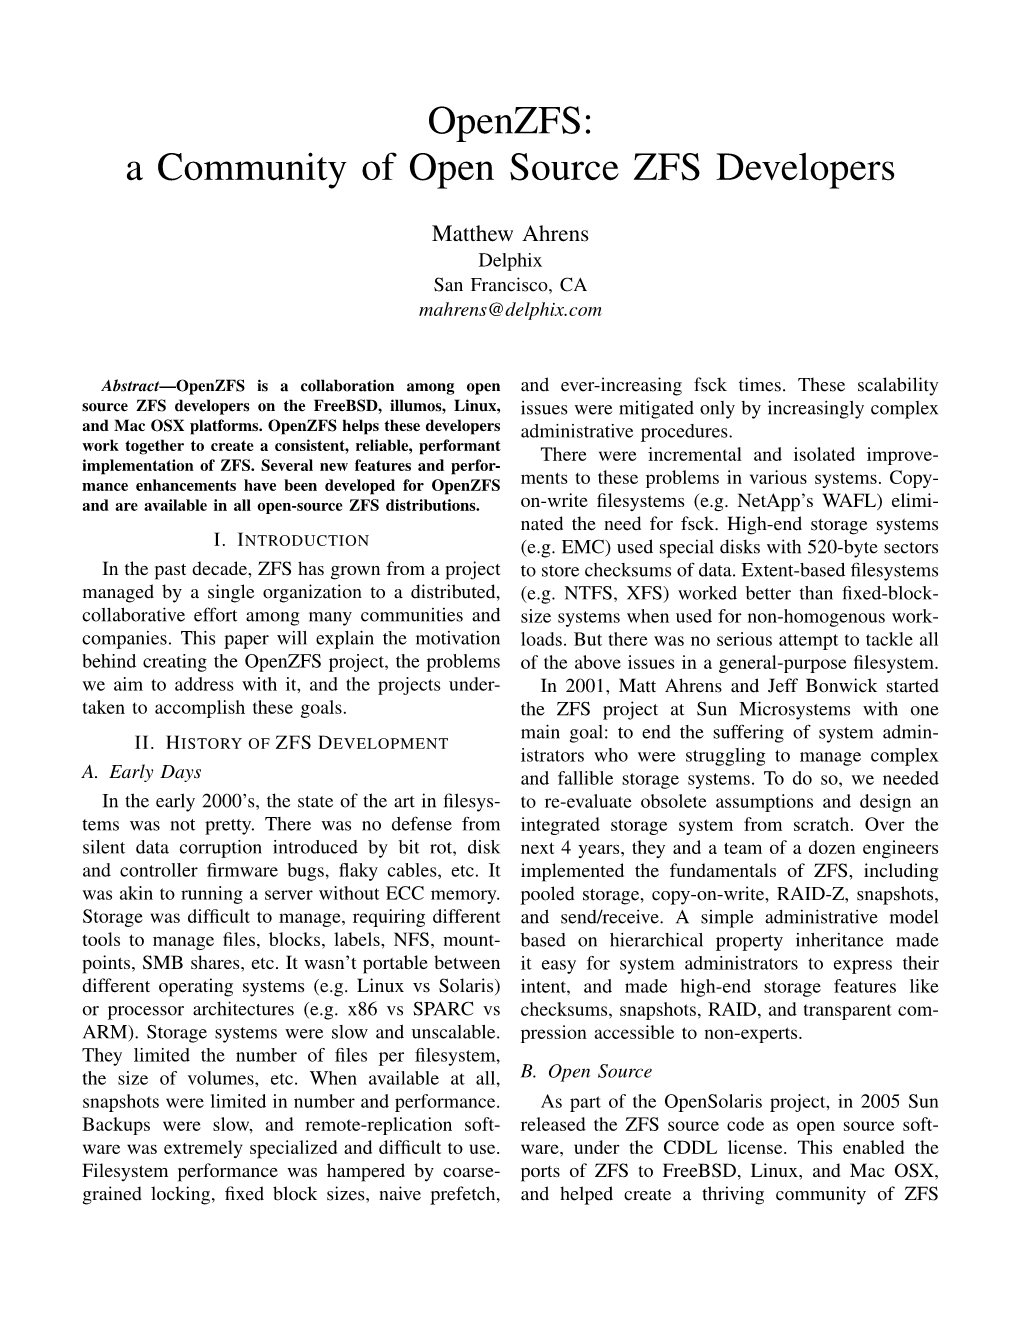 A Community of Open Source ZFS Developers